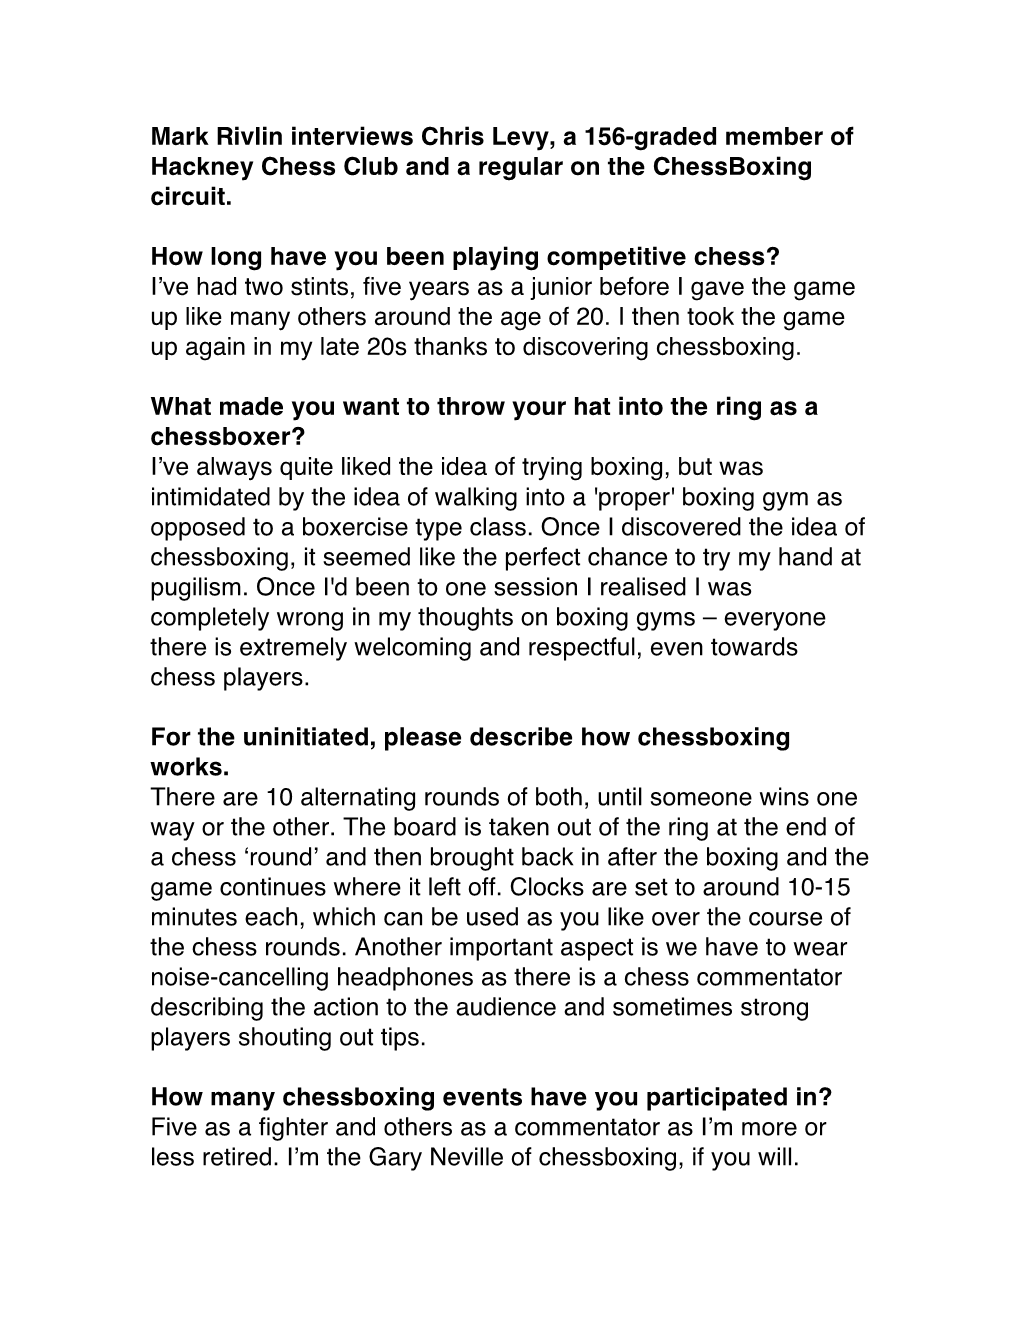 Mark Rivlin Interviews Chris Levy, a 156-Graded Member of Hackney Chess Club and a Regular on the Chessboxing Circuit